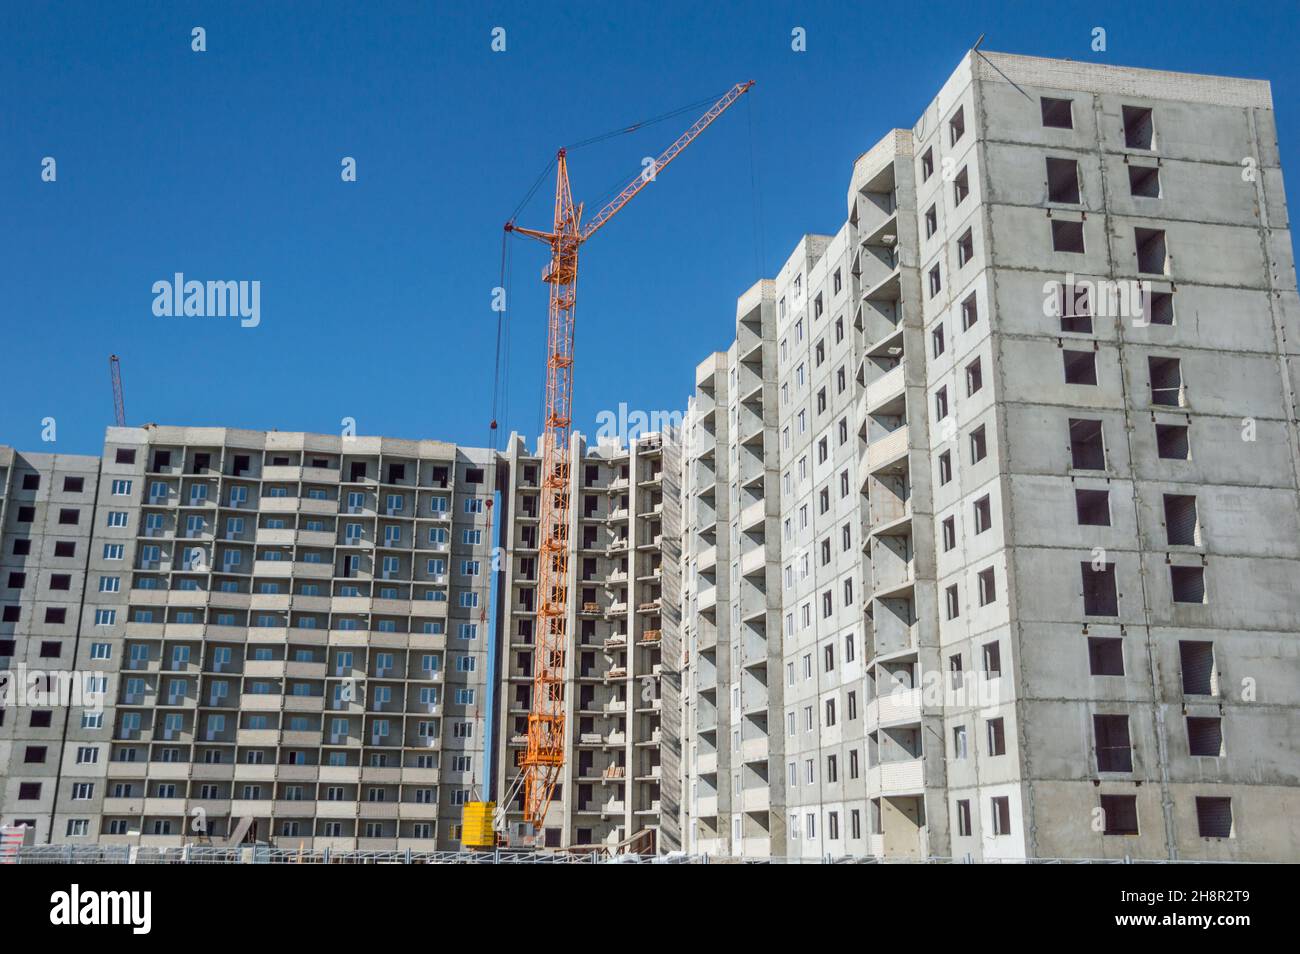 Construction work site and hoisting tower cranes Stock Photo